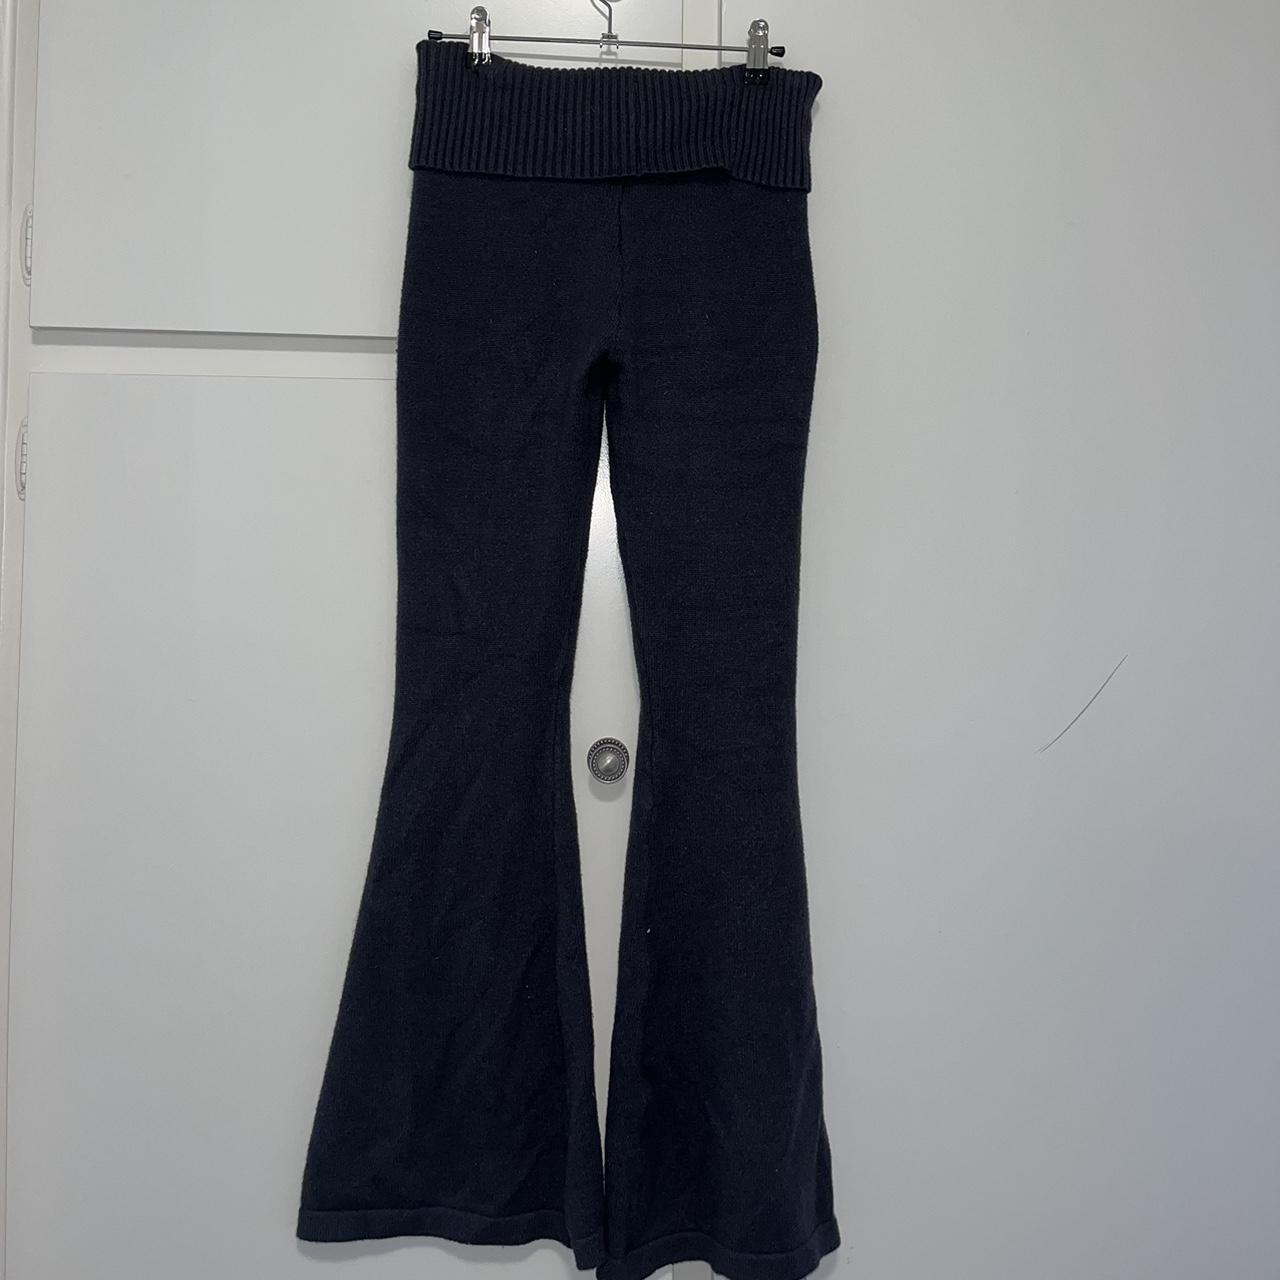 Edikted Women's Navy and Grey Trousers (3)